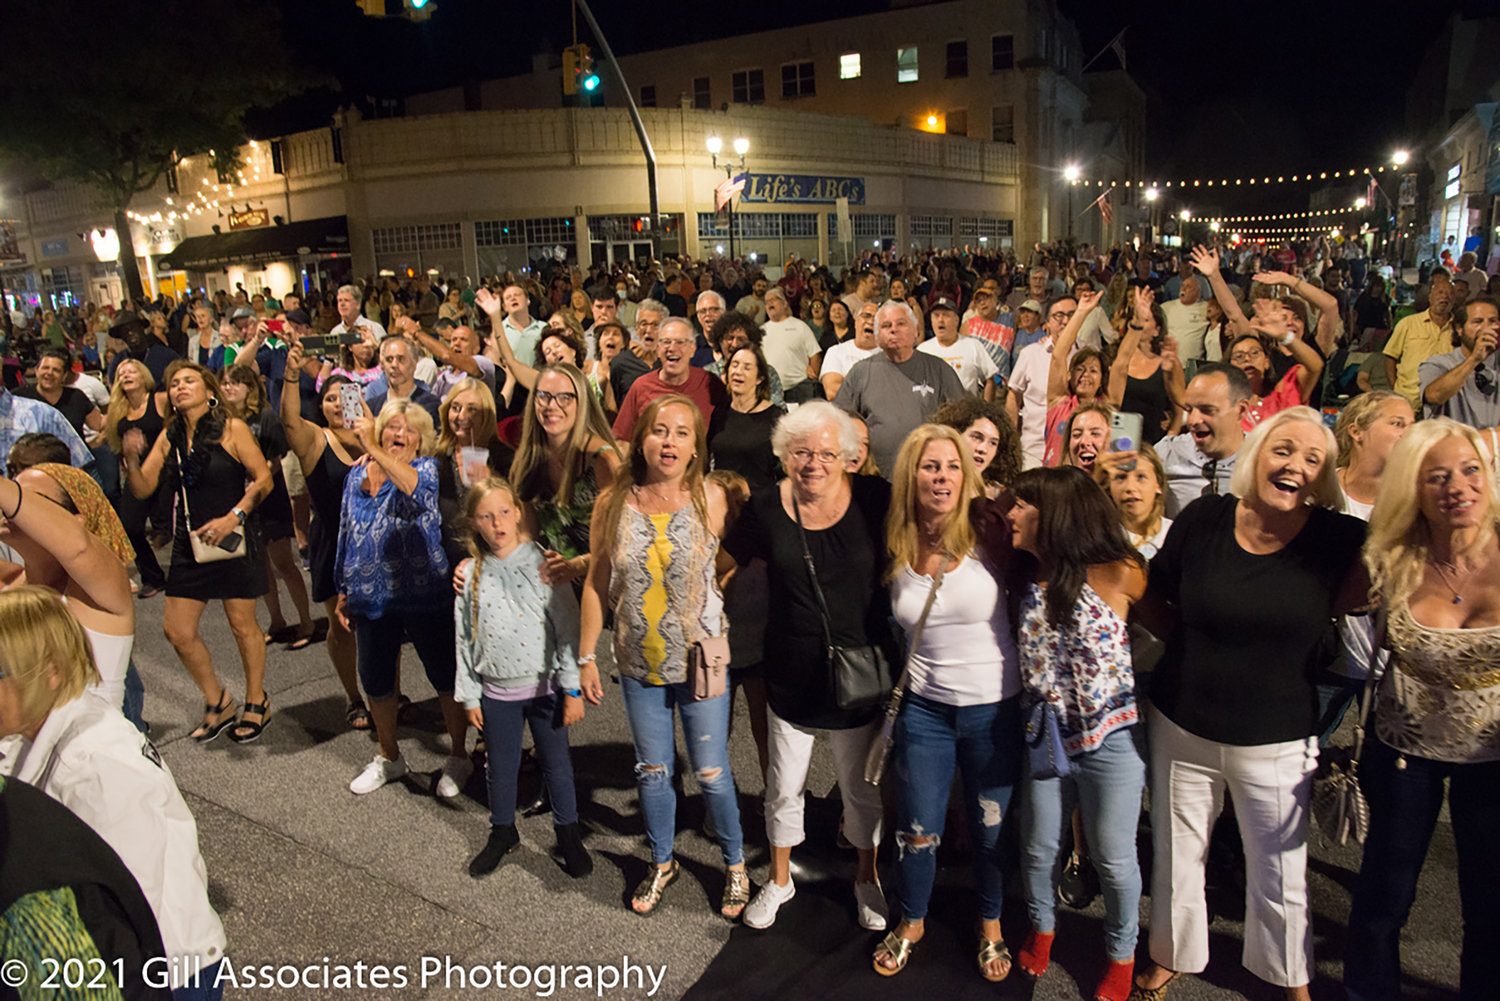 There were crowds of enthusiastic concertgoers at the Richie Cannata and Lords of 52nd Street concert in August 2021.